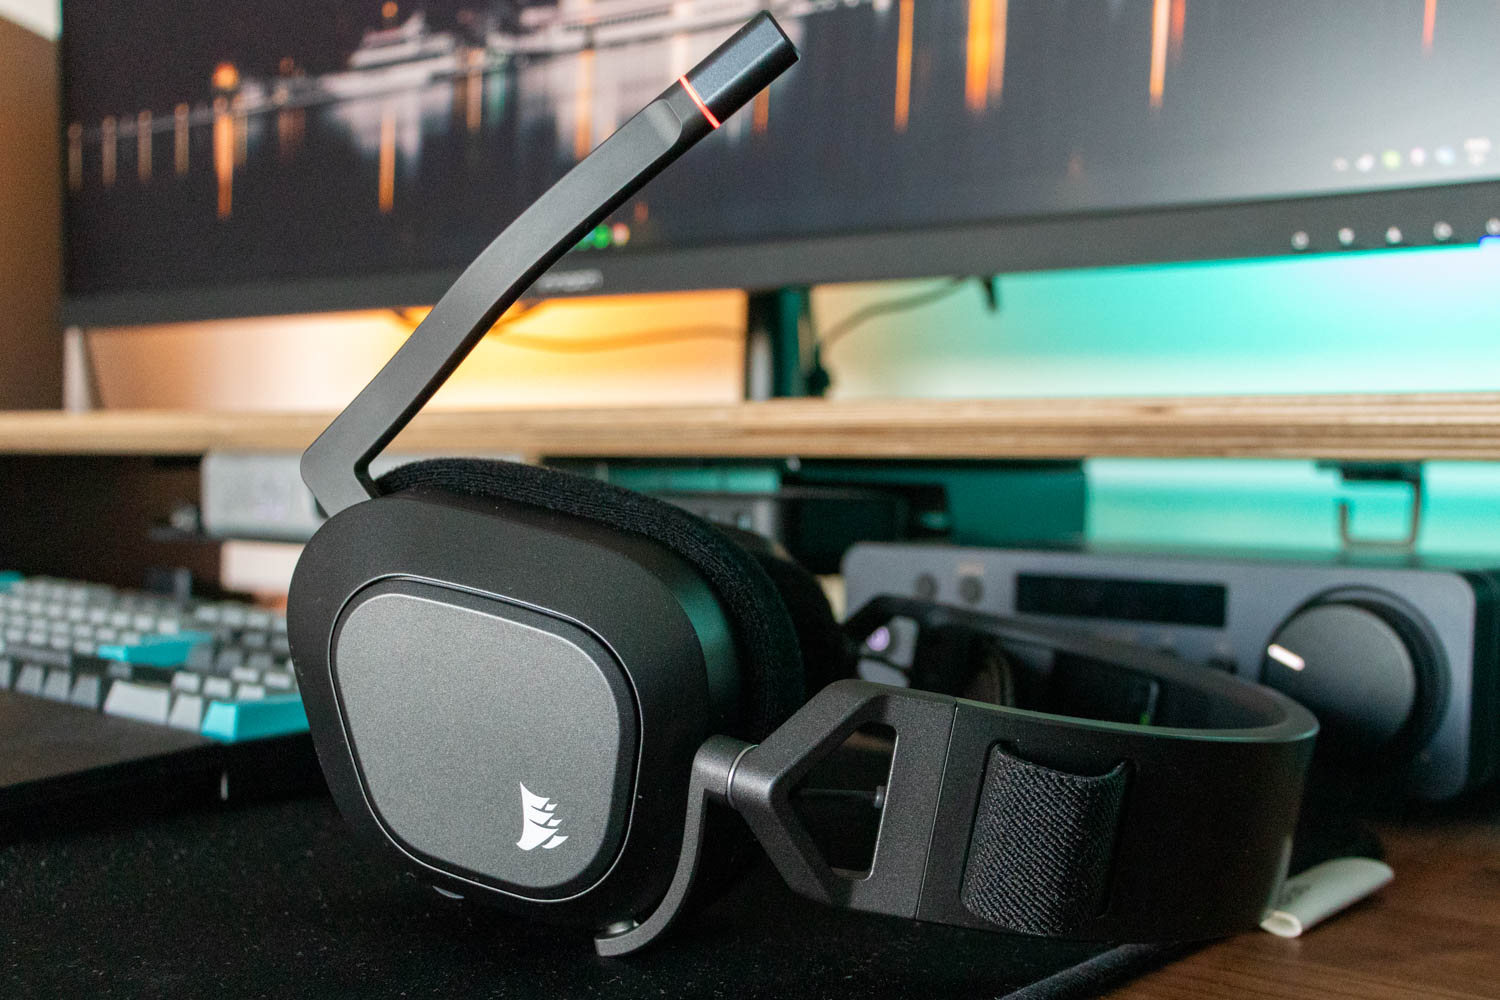 Corsair HS80 RGB Wireless review: The best gaming headset?